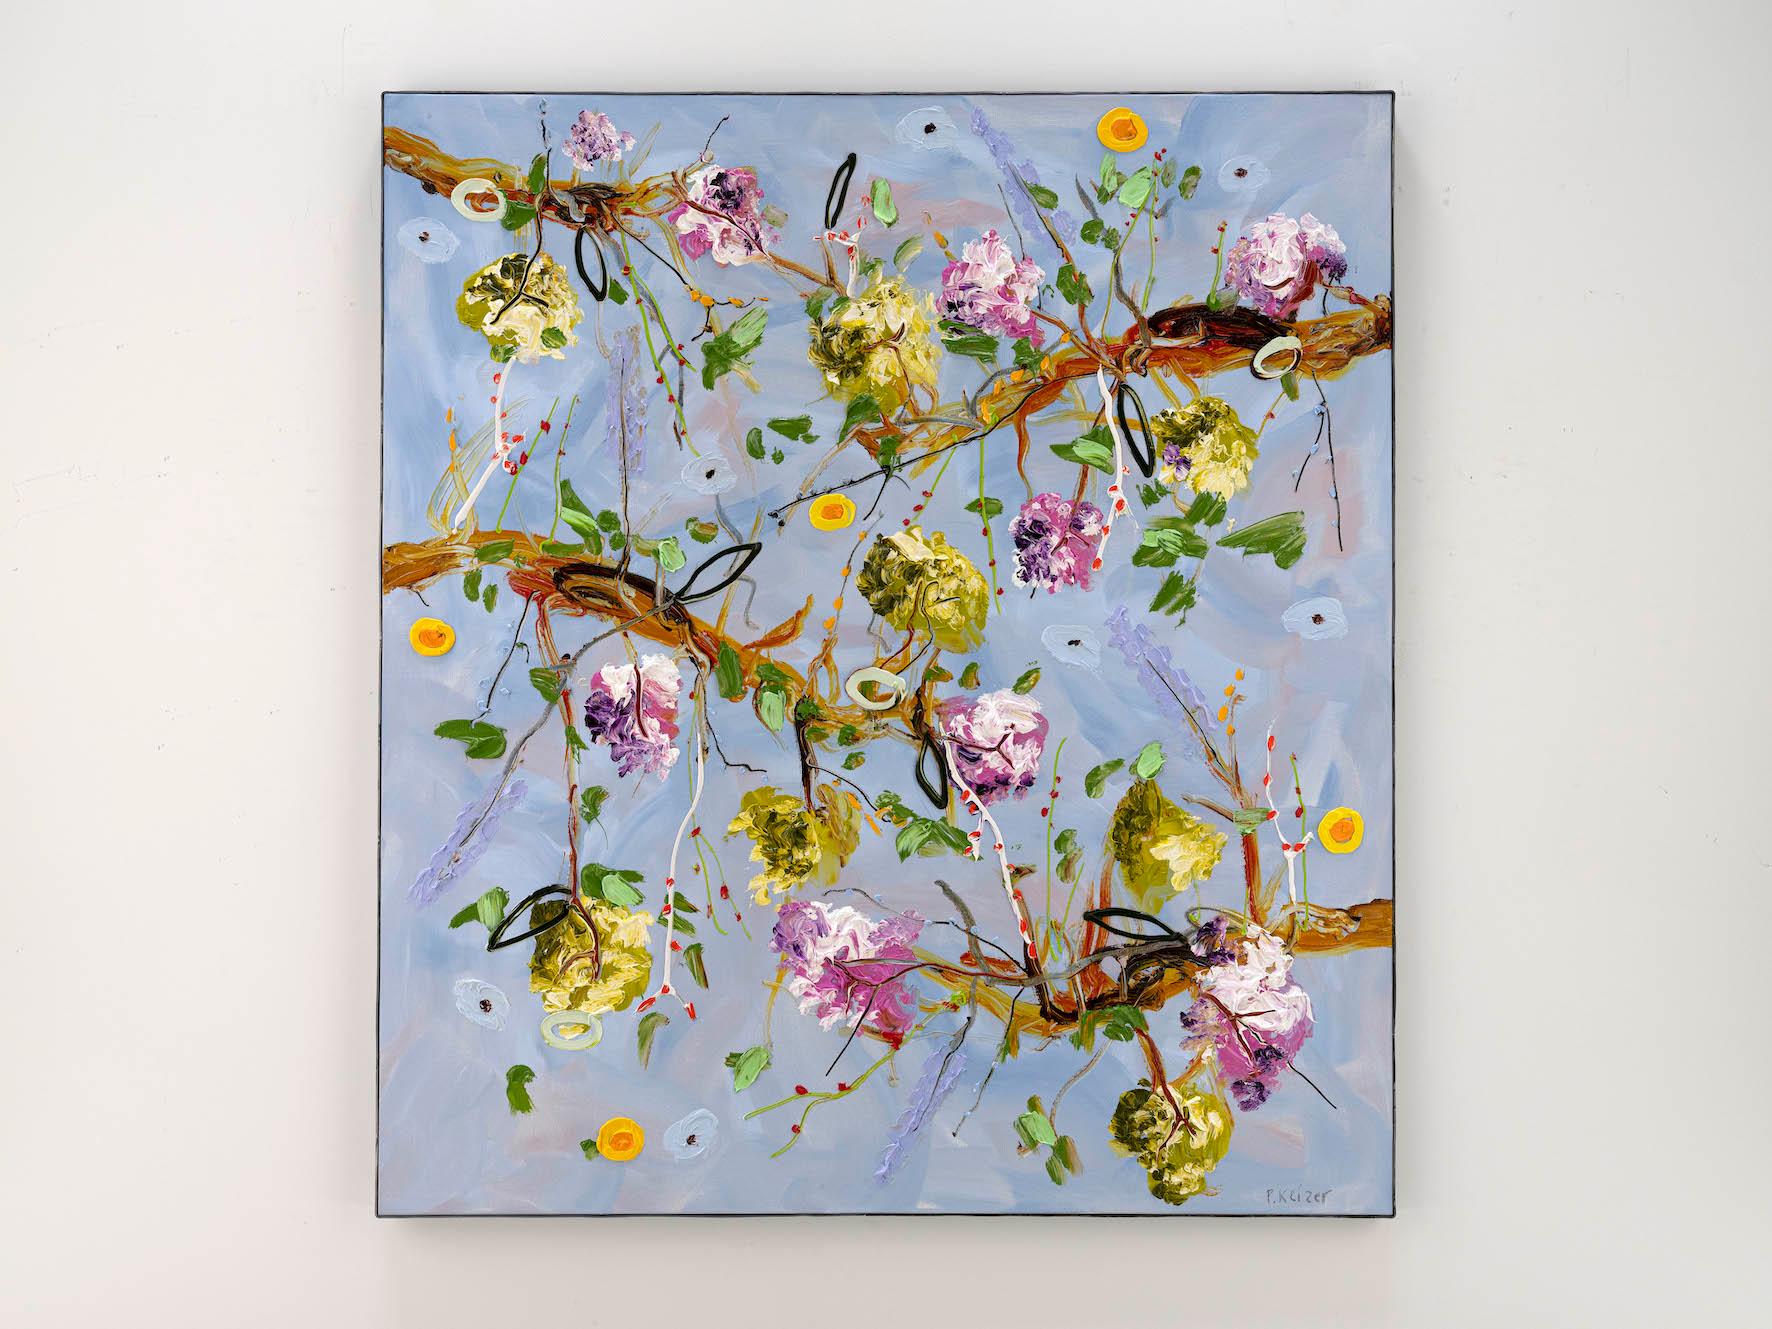 Contemporary oil painting on canvas - Peter Keizer - Flowers, Nature 1